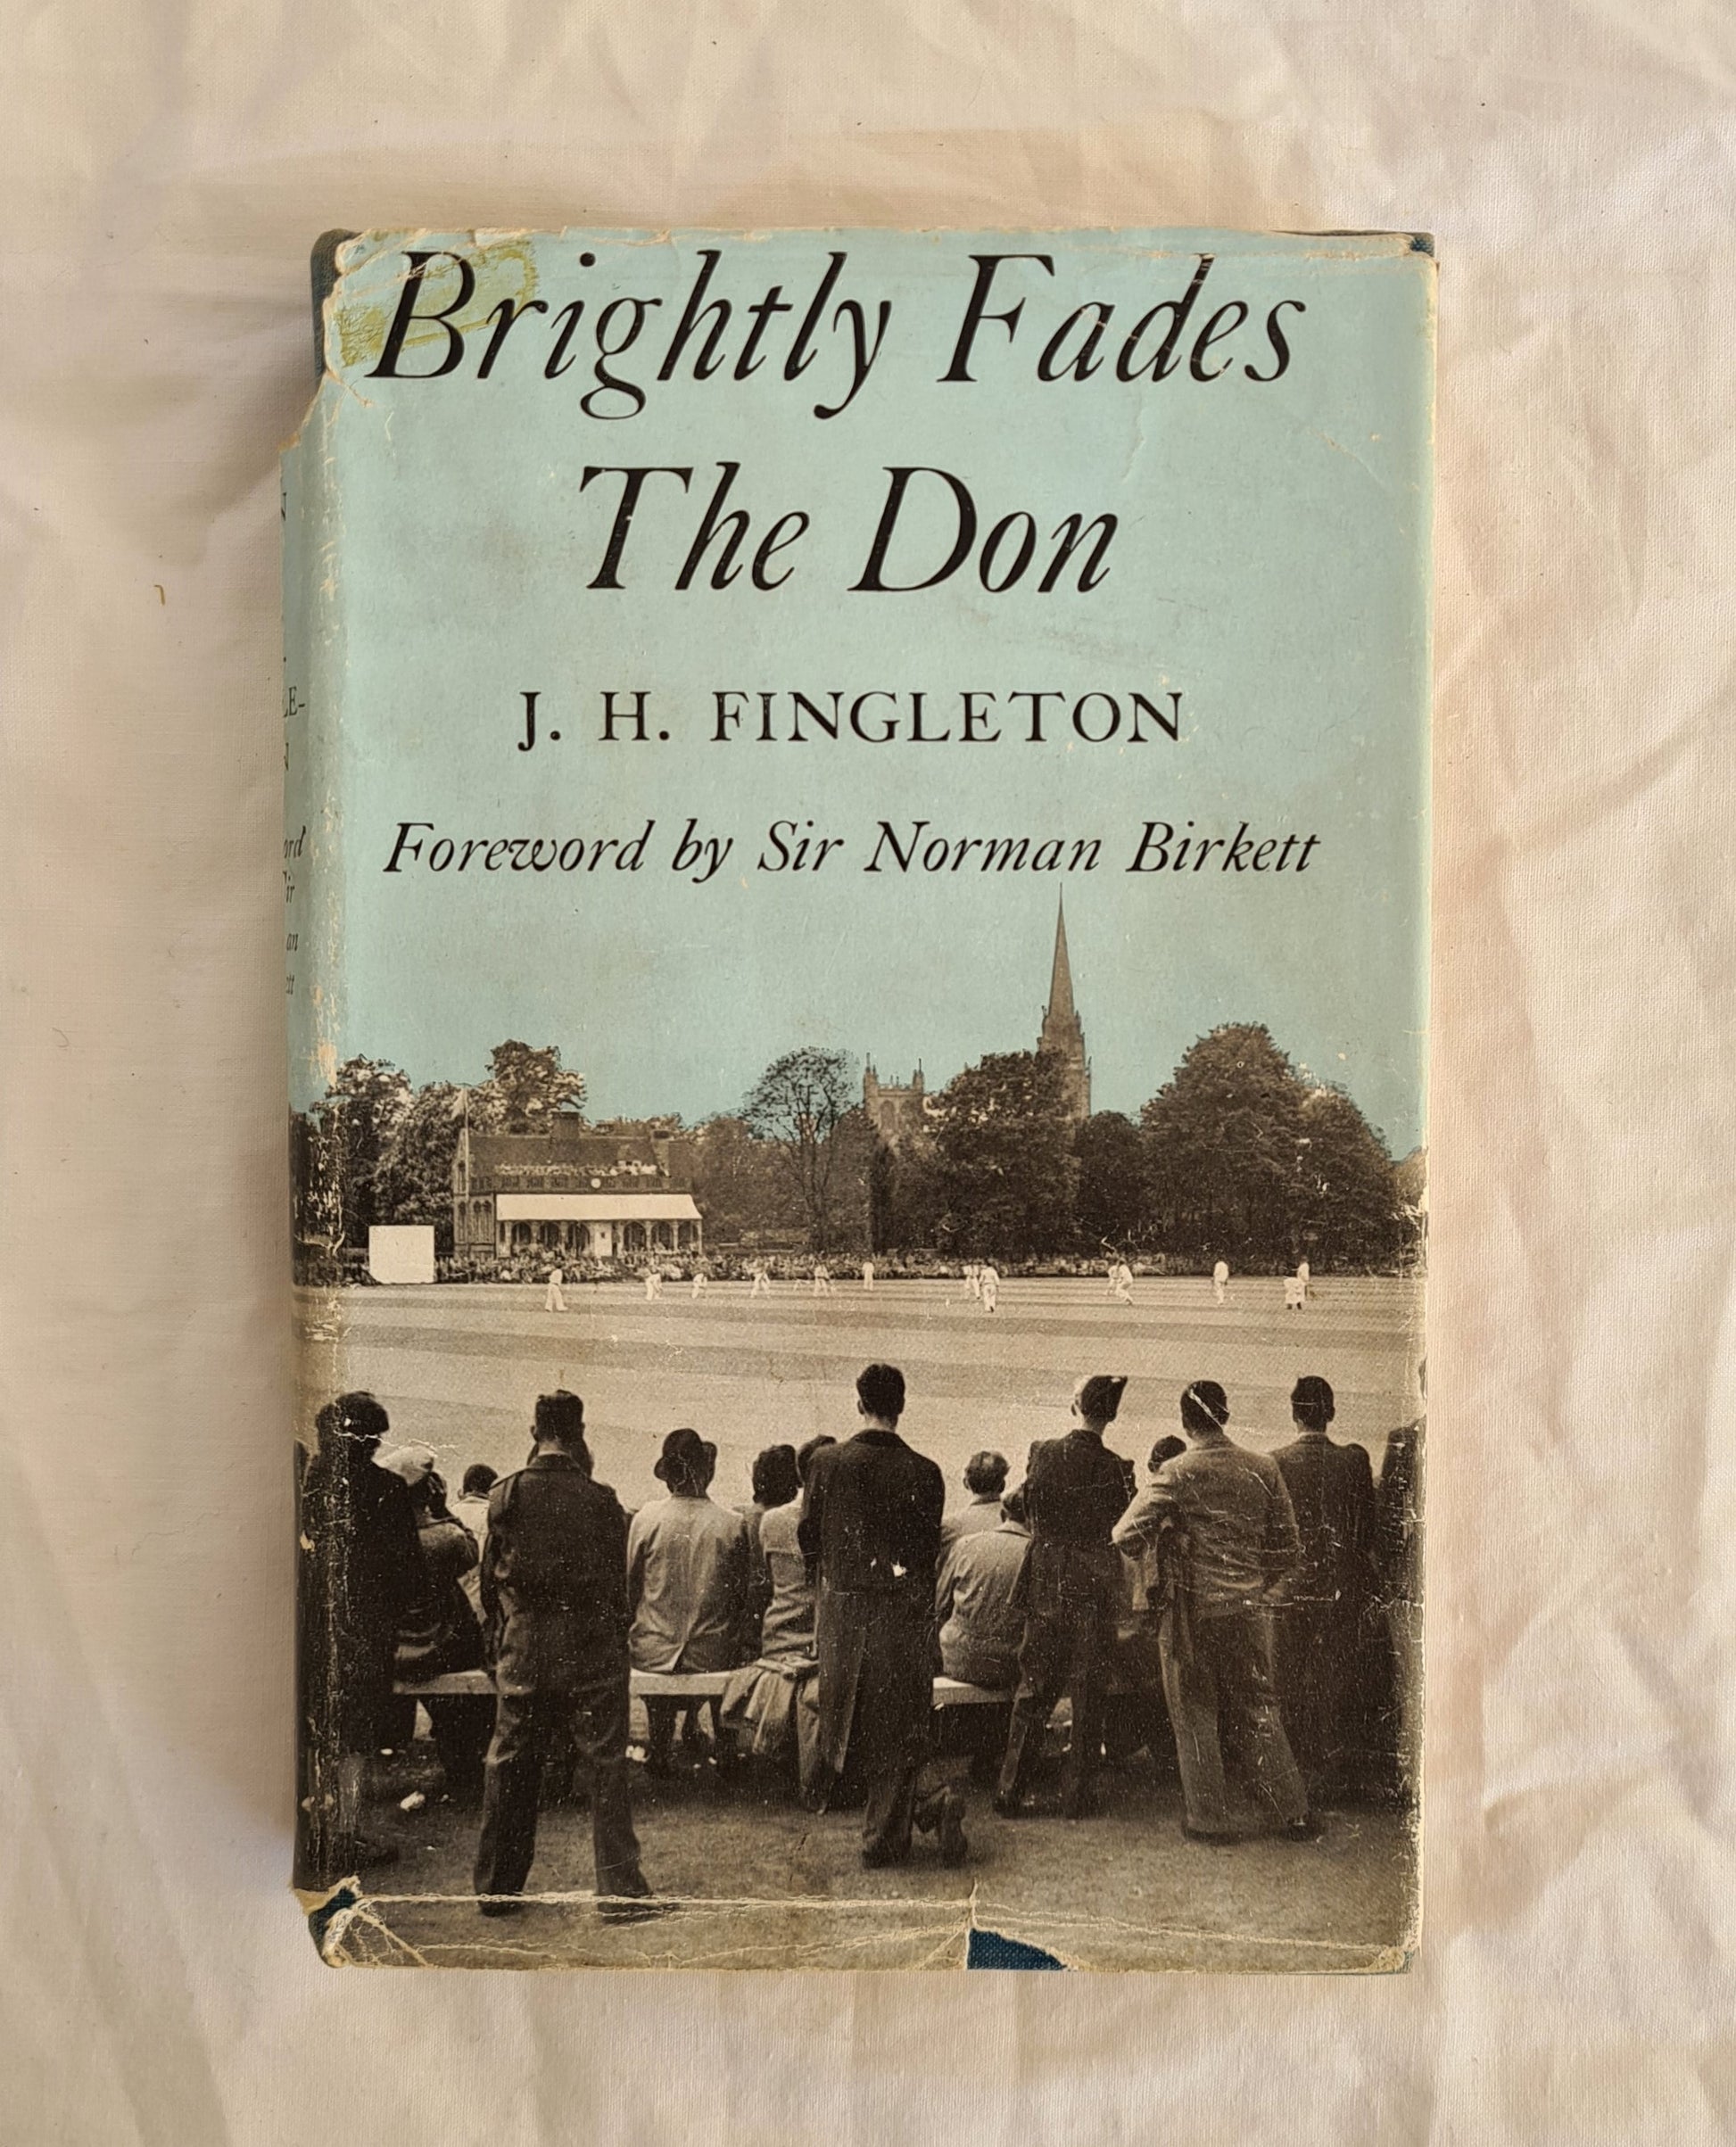 Brightly Fades the Don  by J. H. Fingleton